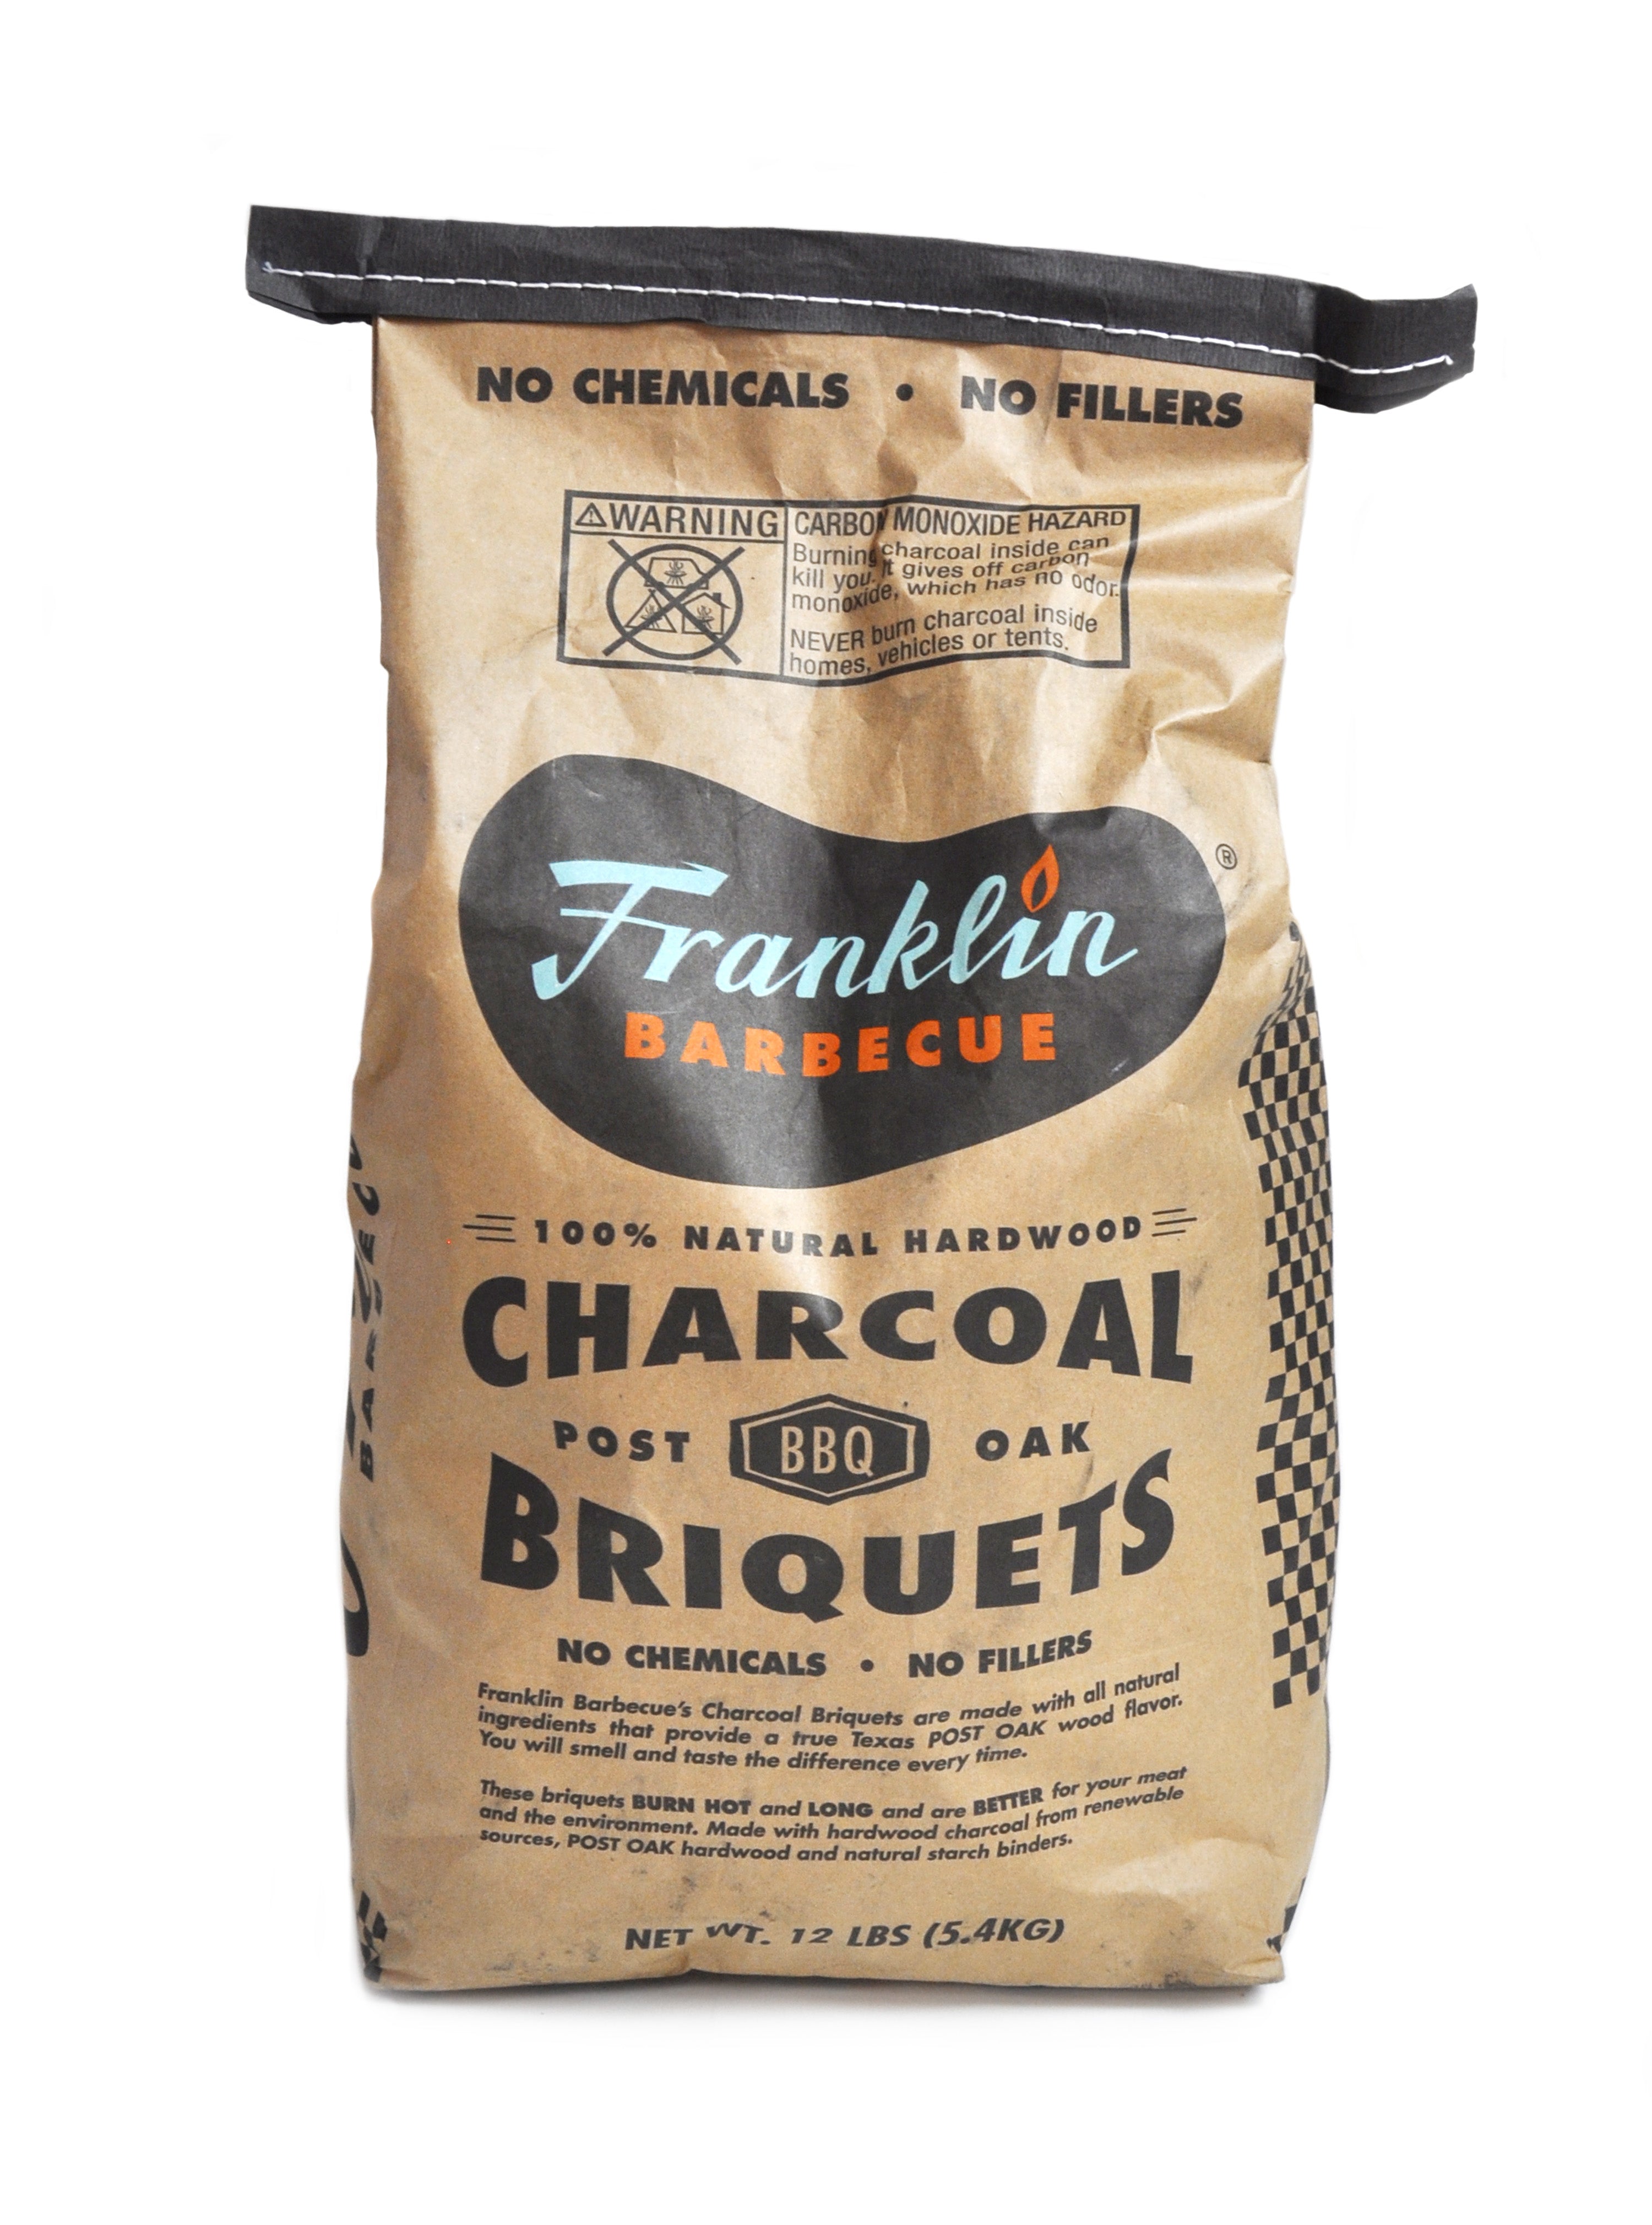 Bag of Franklin Barbecue Charcoal Briquets. Includes Franklin Barbecue bean shaped logo in black with blue and orange lettering